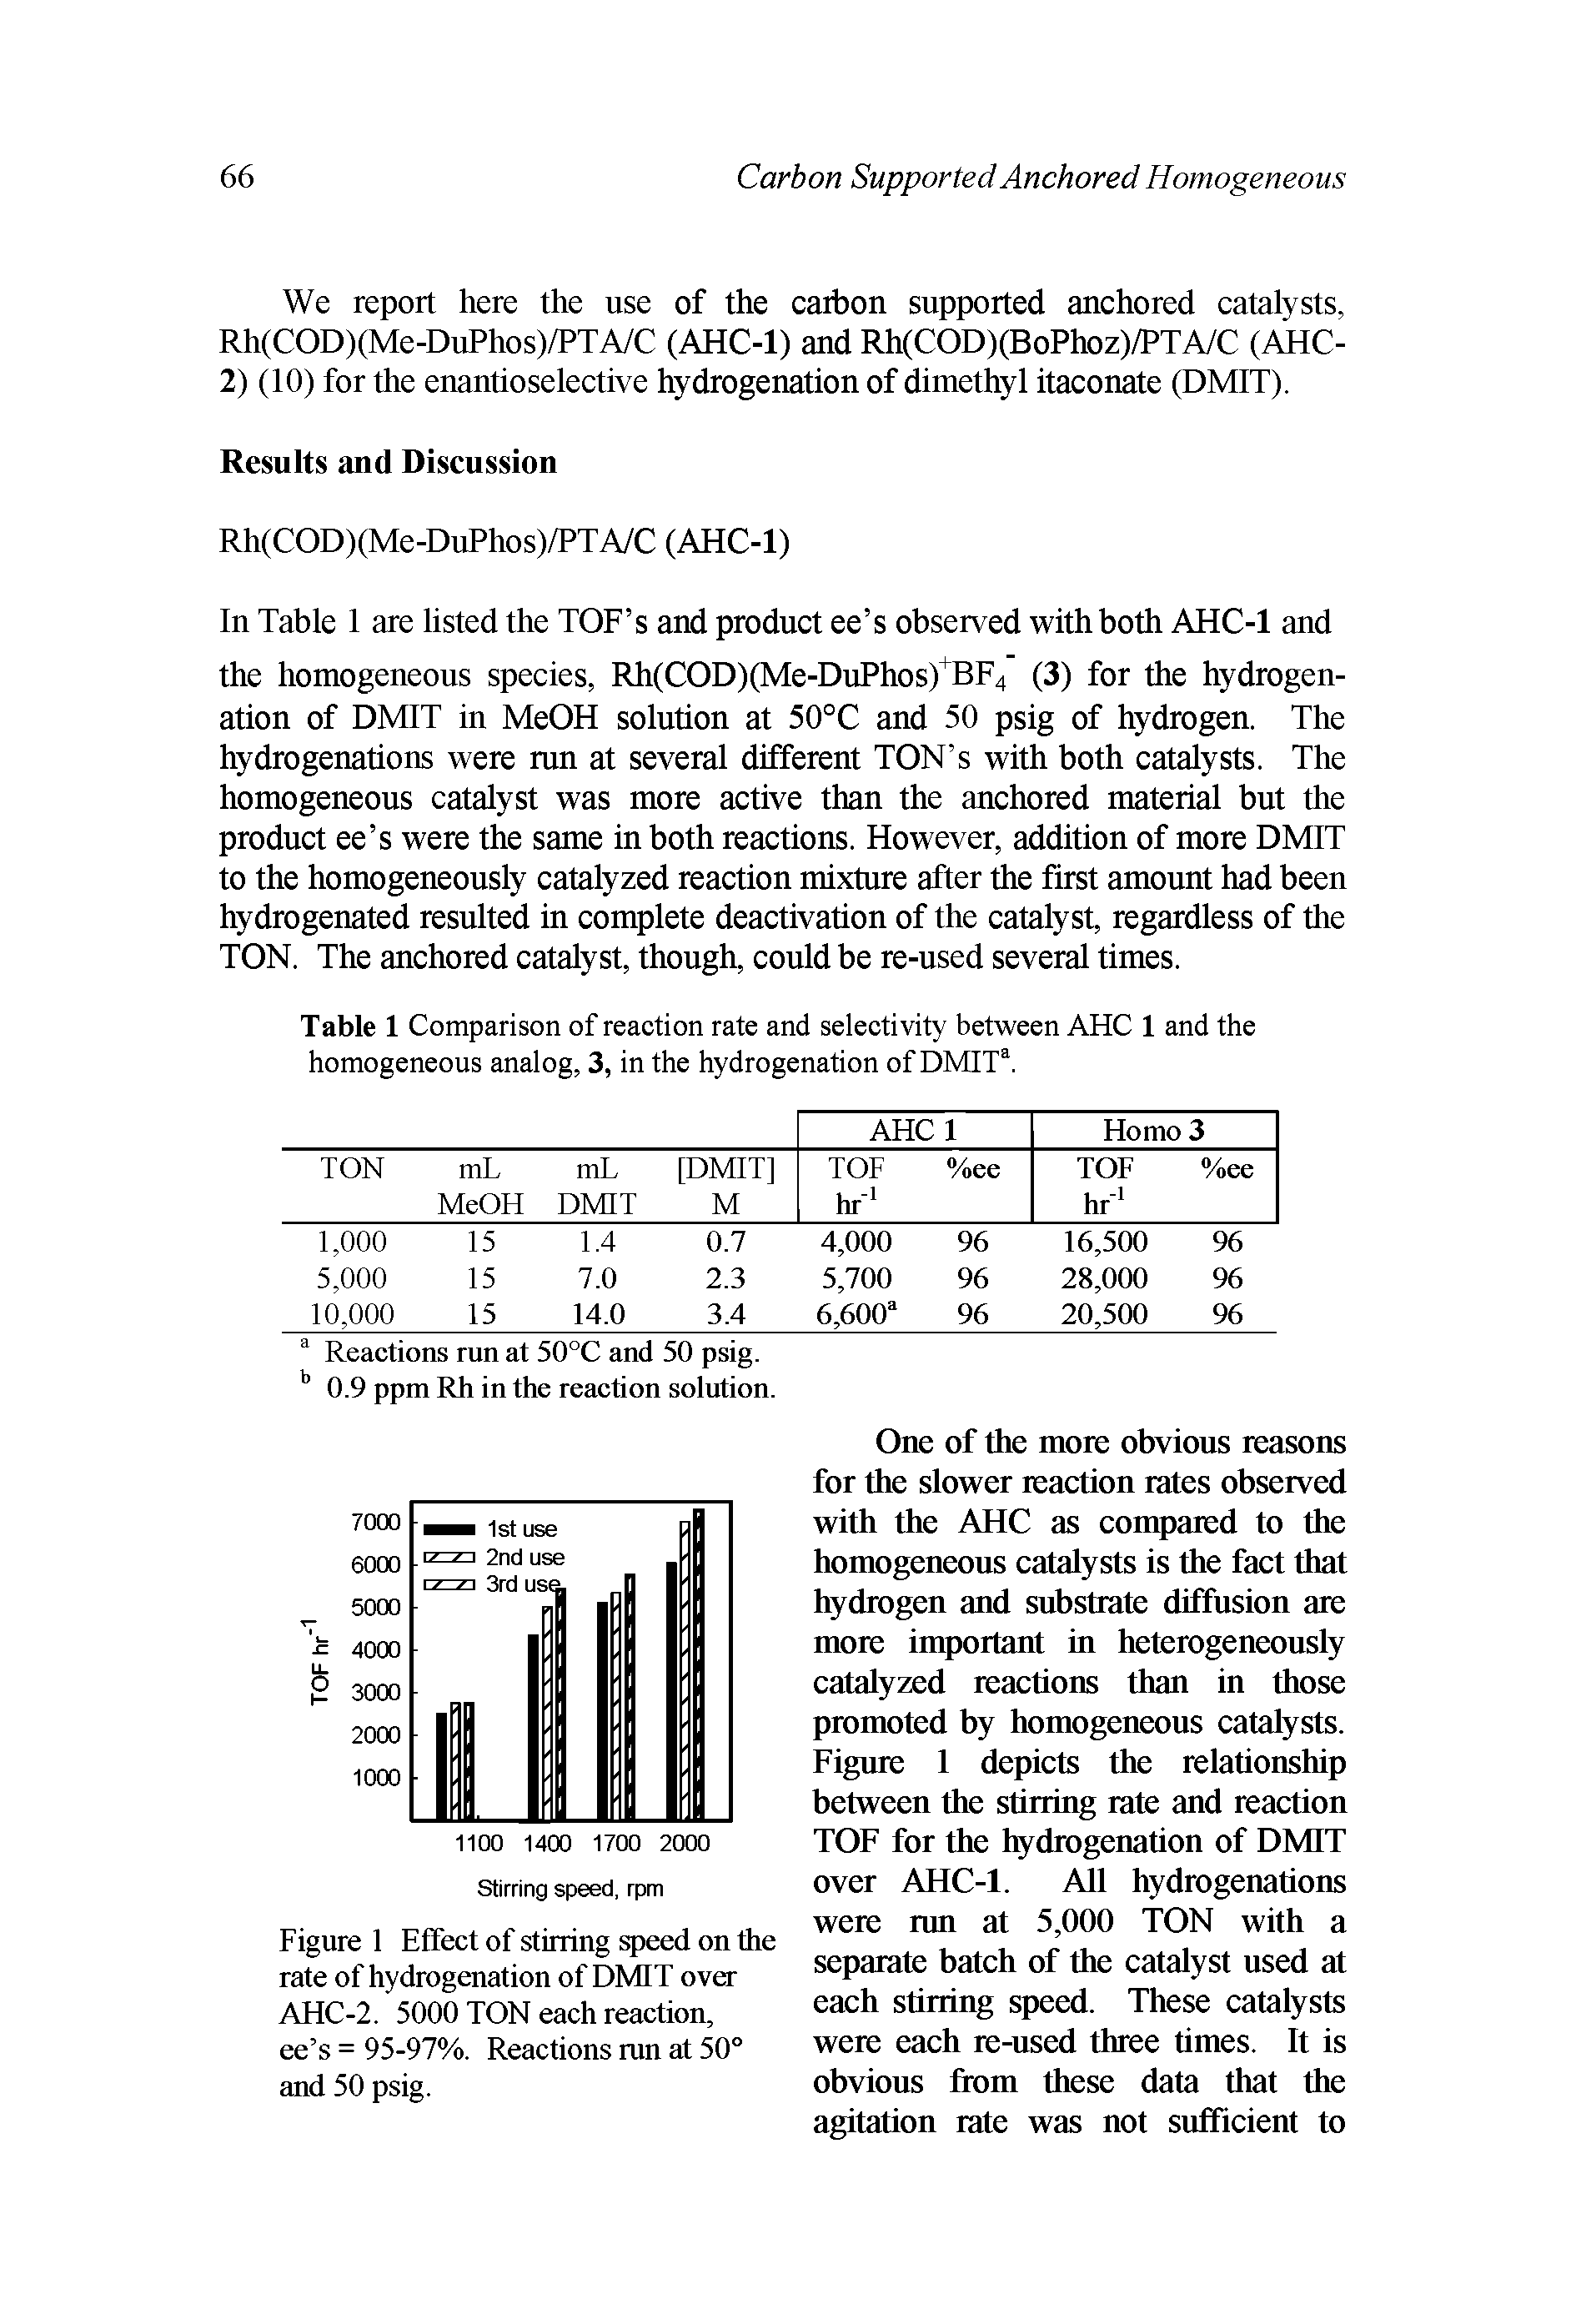 Figure 1 Effect of stirring speed on the rate of hydrogenation of DMIT over AHC-2. 5000 TON each reaction, ee s = 95-97%. Reactions run at 50° and 50 psig.